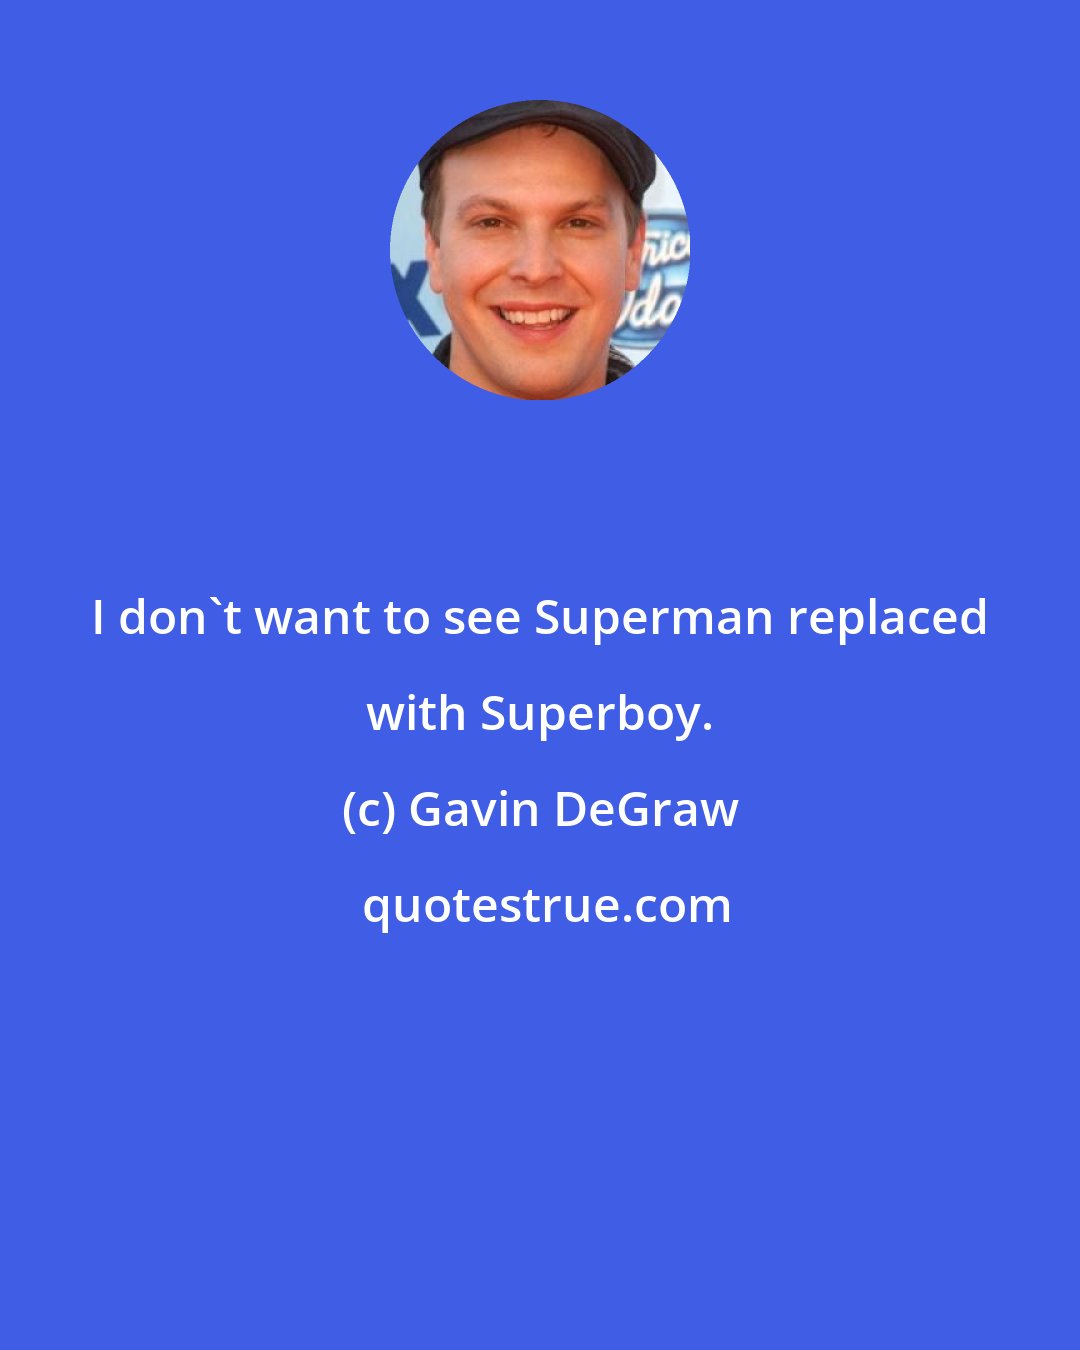 Gavin DeGraw: I don't want to see Superman replaced with Superboy.